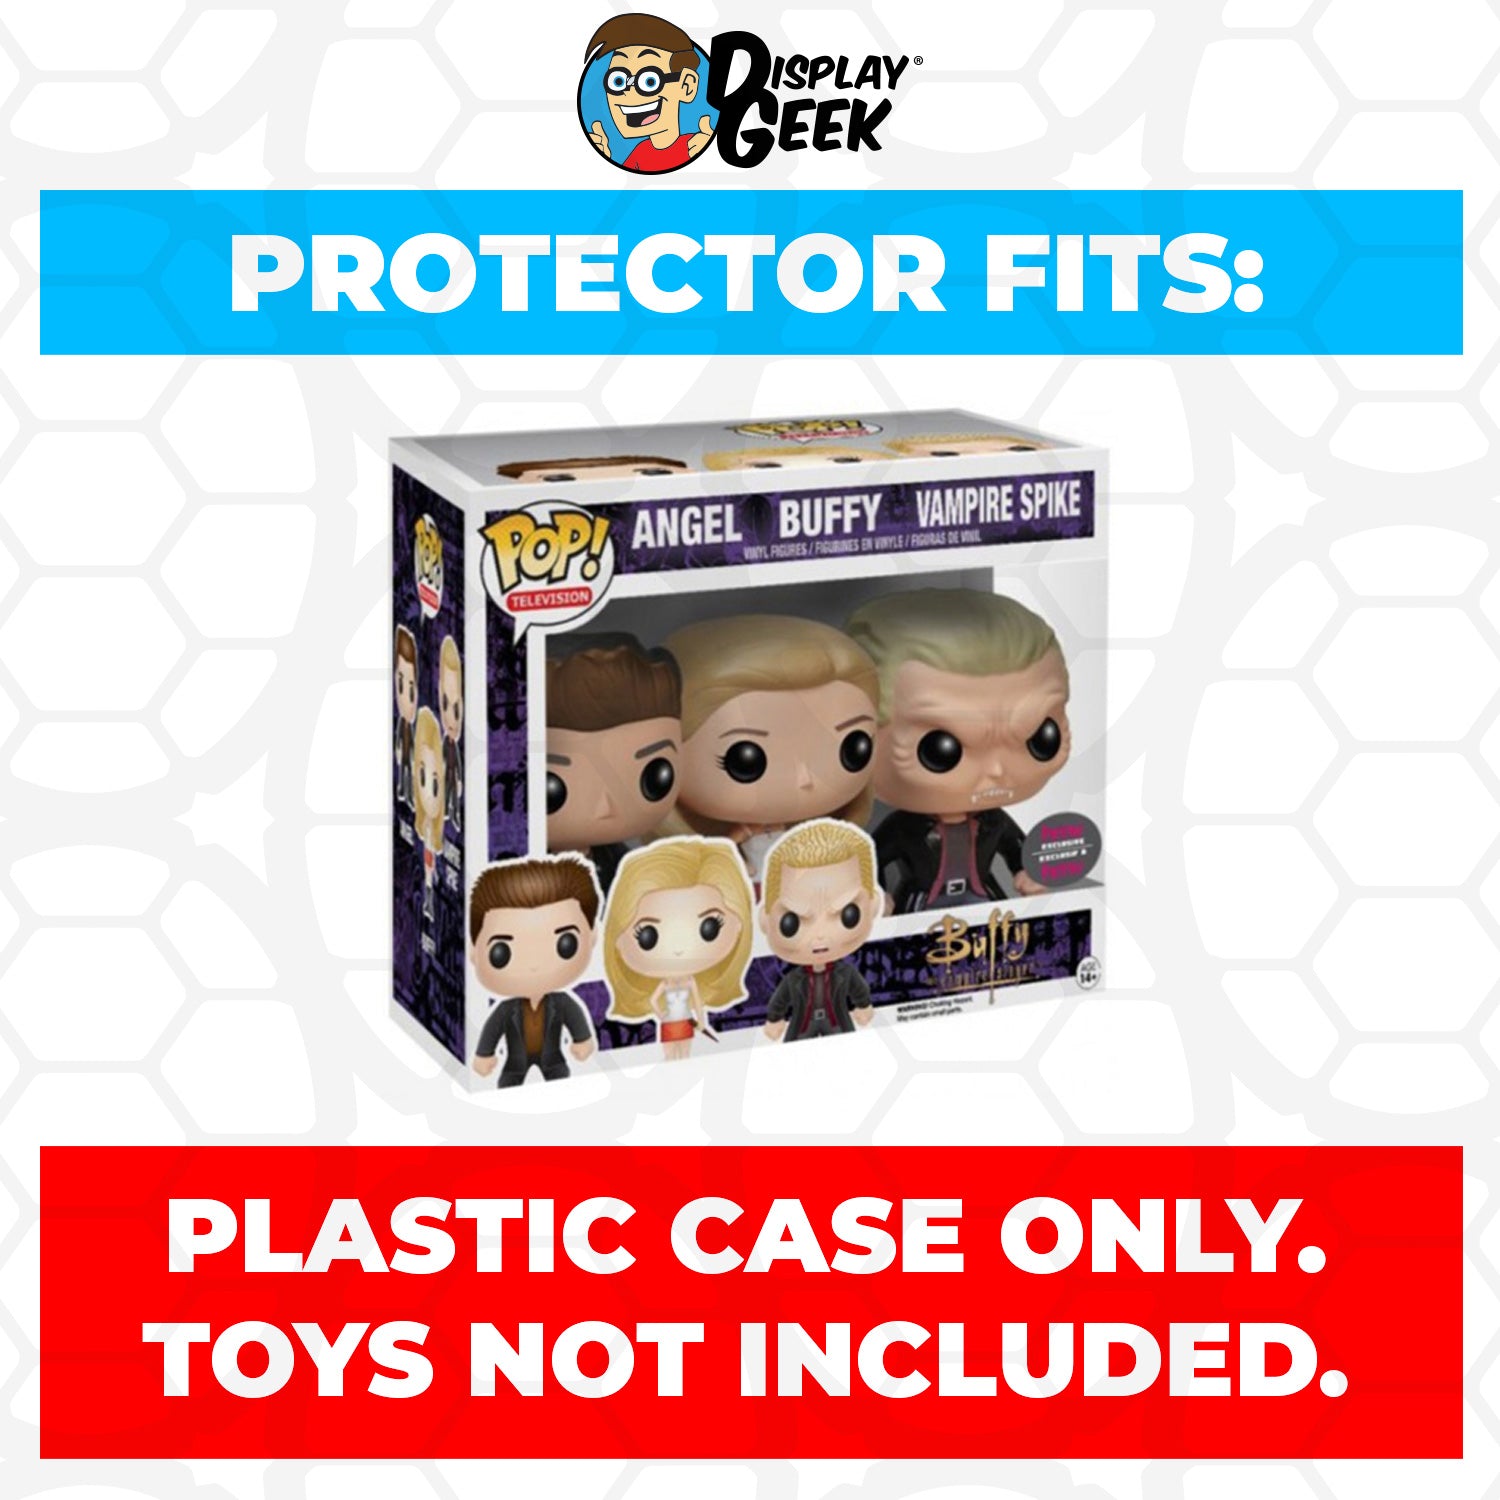 Pop Protector for 3 Pack Angel, Buffy & Vampire Spike HMV Funko Pop - PPG Pop Protector Guide Search Created by Display Geek